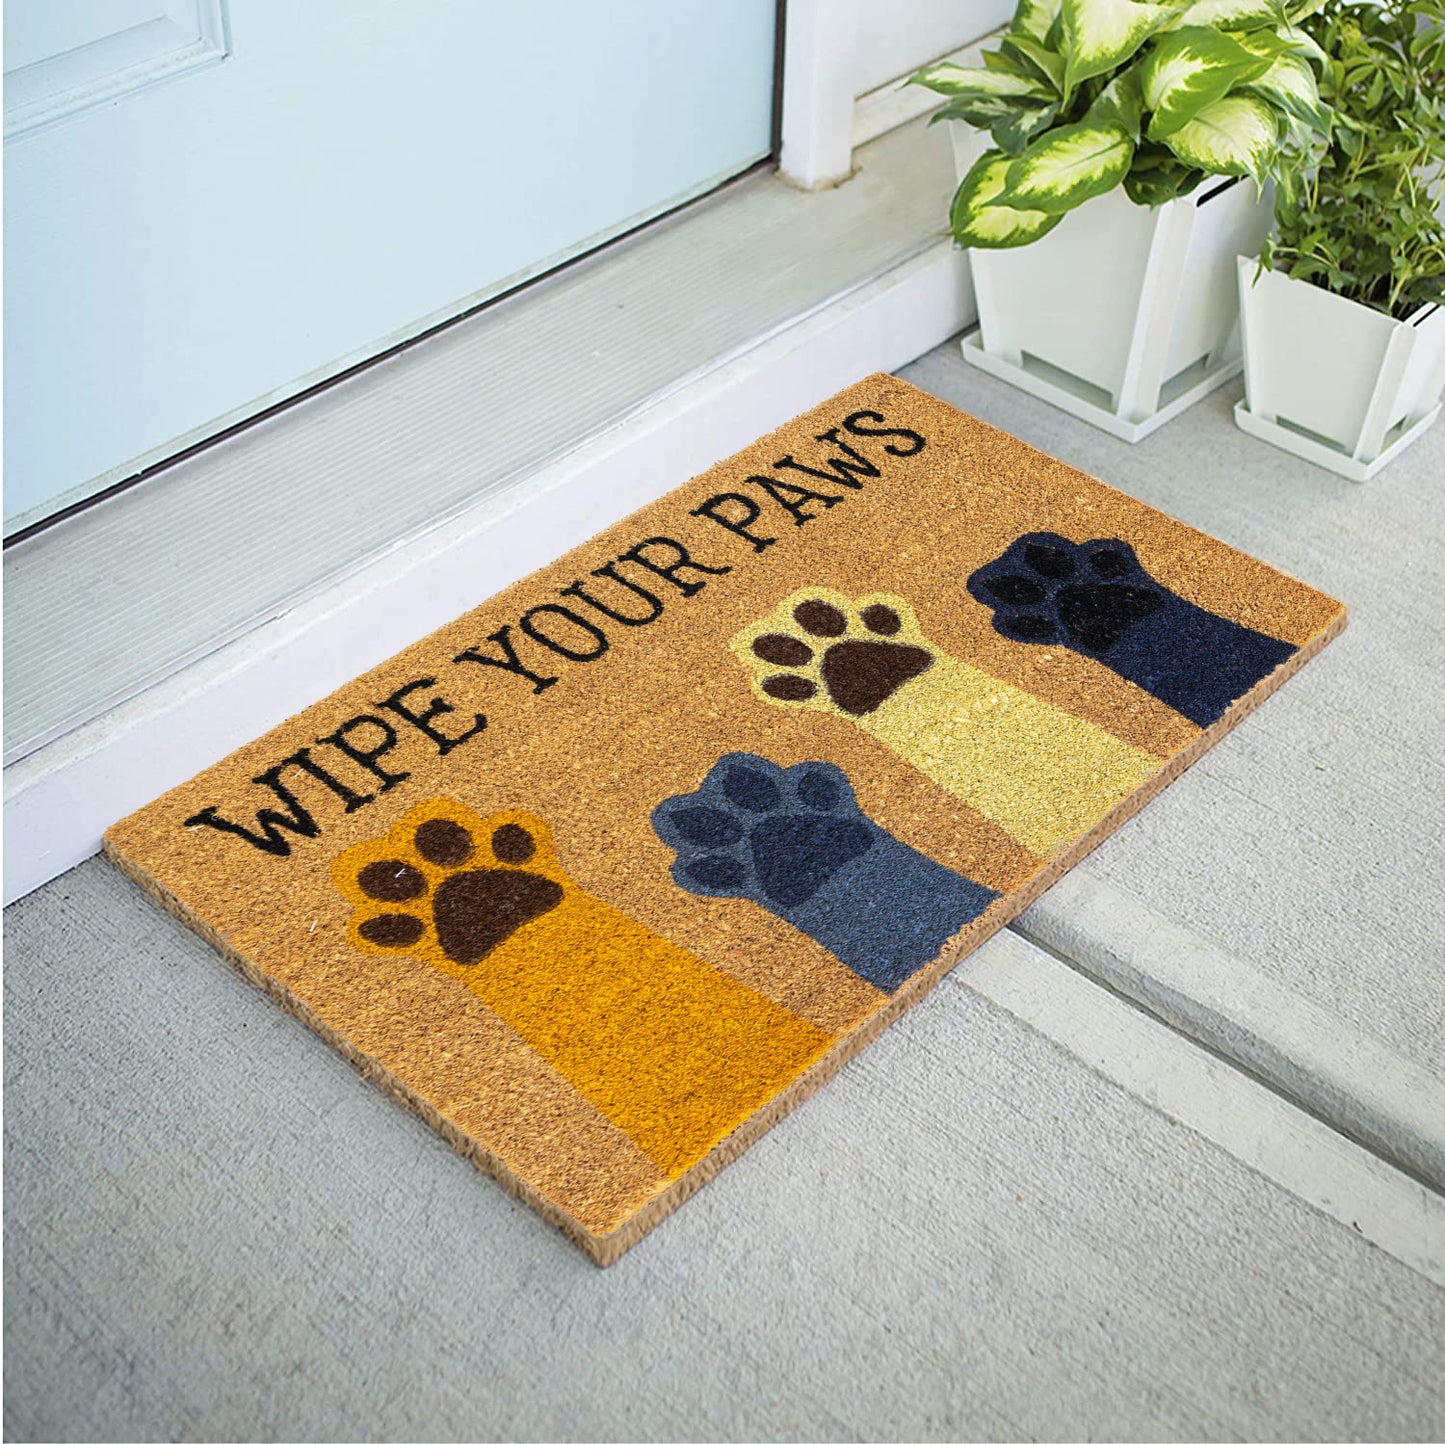 Avera Products "Wipe Your Paws" Fun Design Dog Doormat 29x17